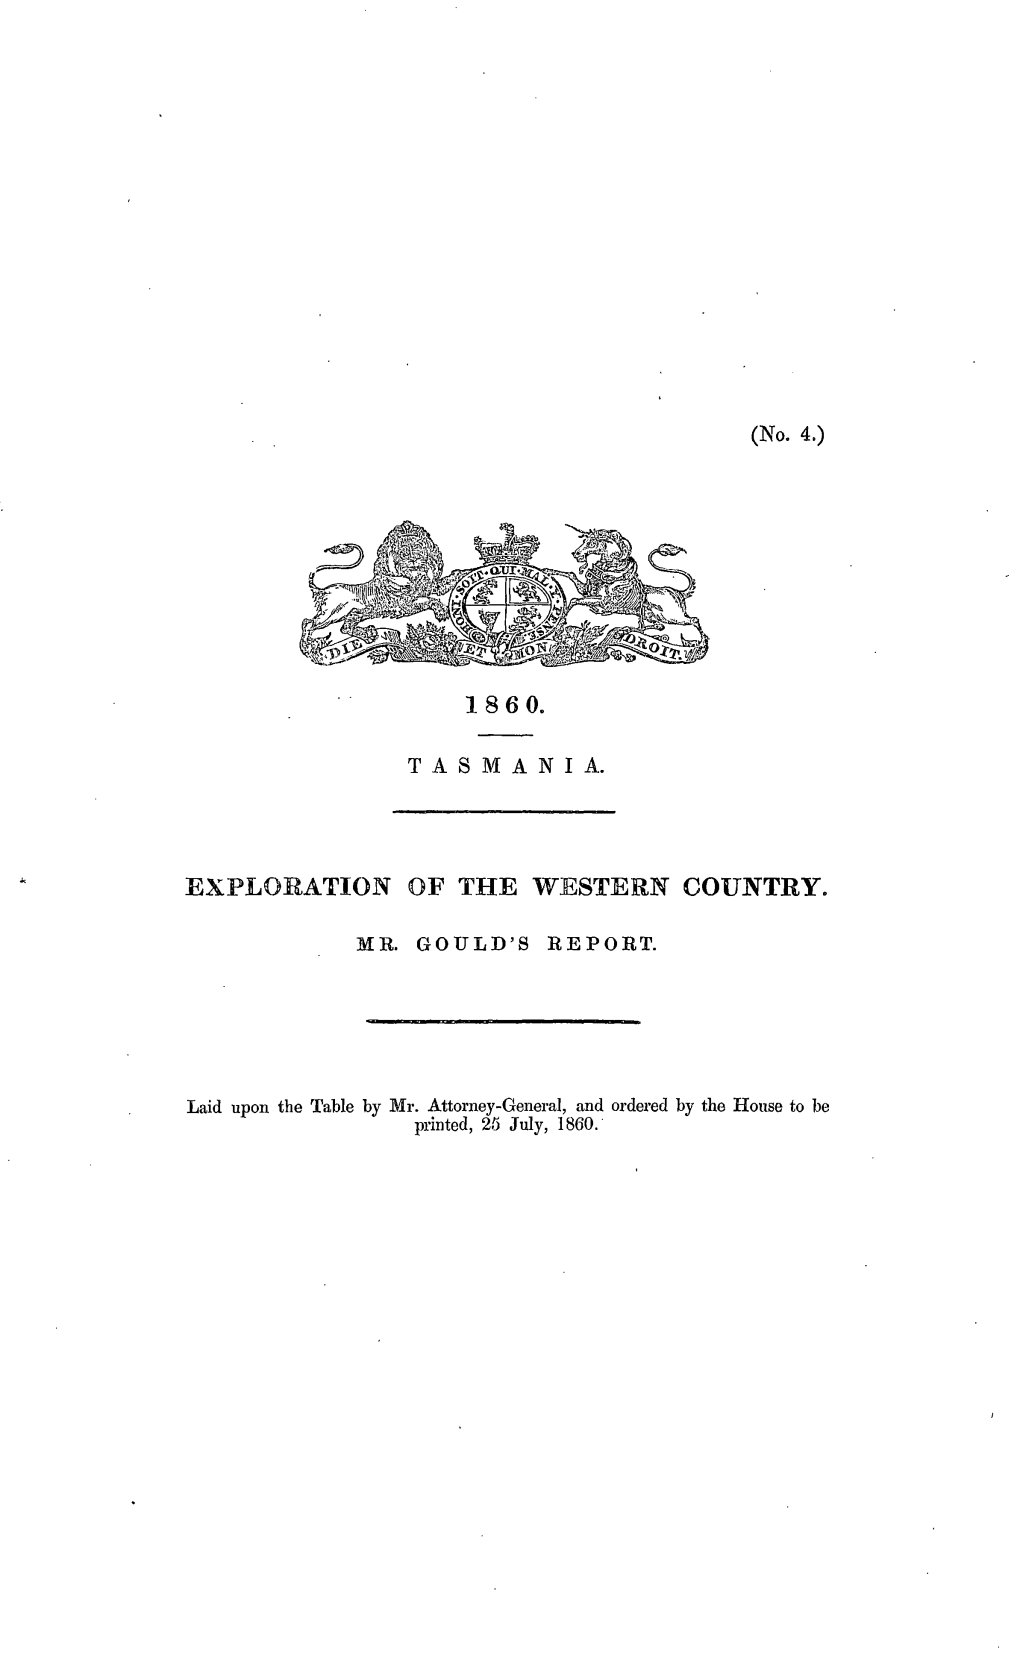 Exploration of the Western Country Mr. Gould's Report